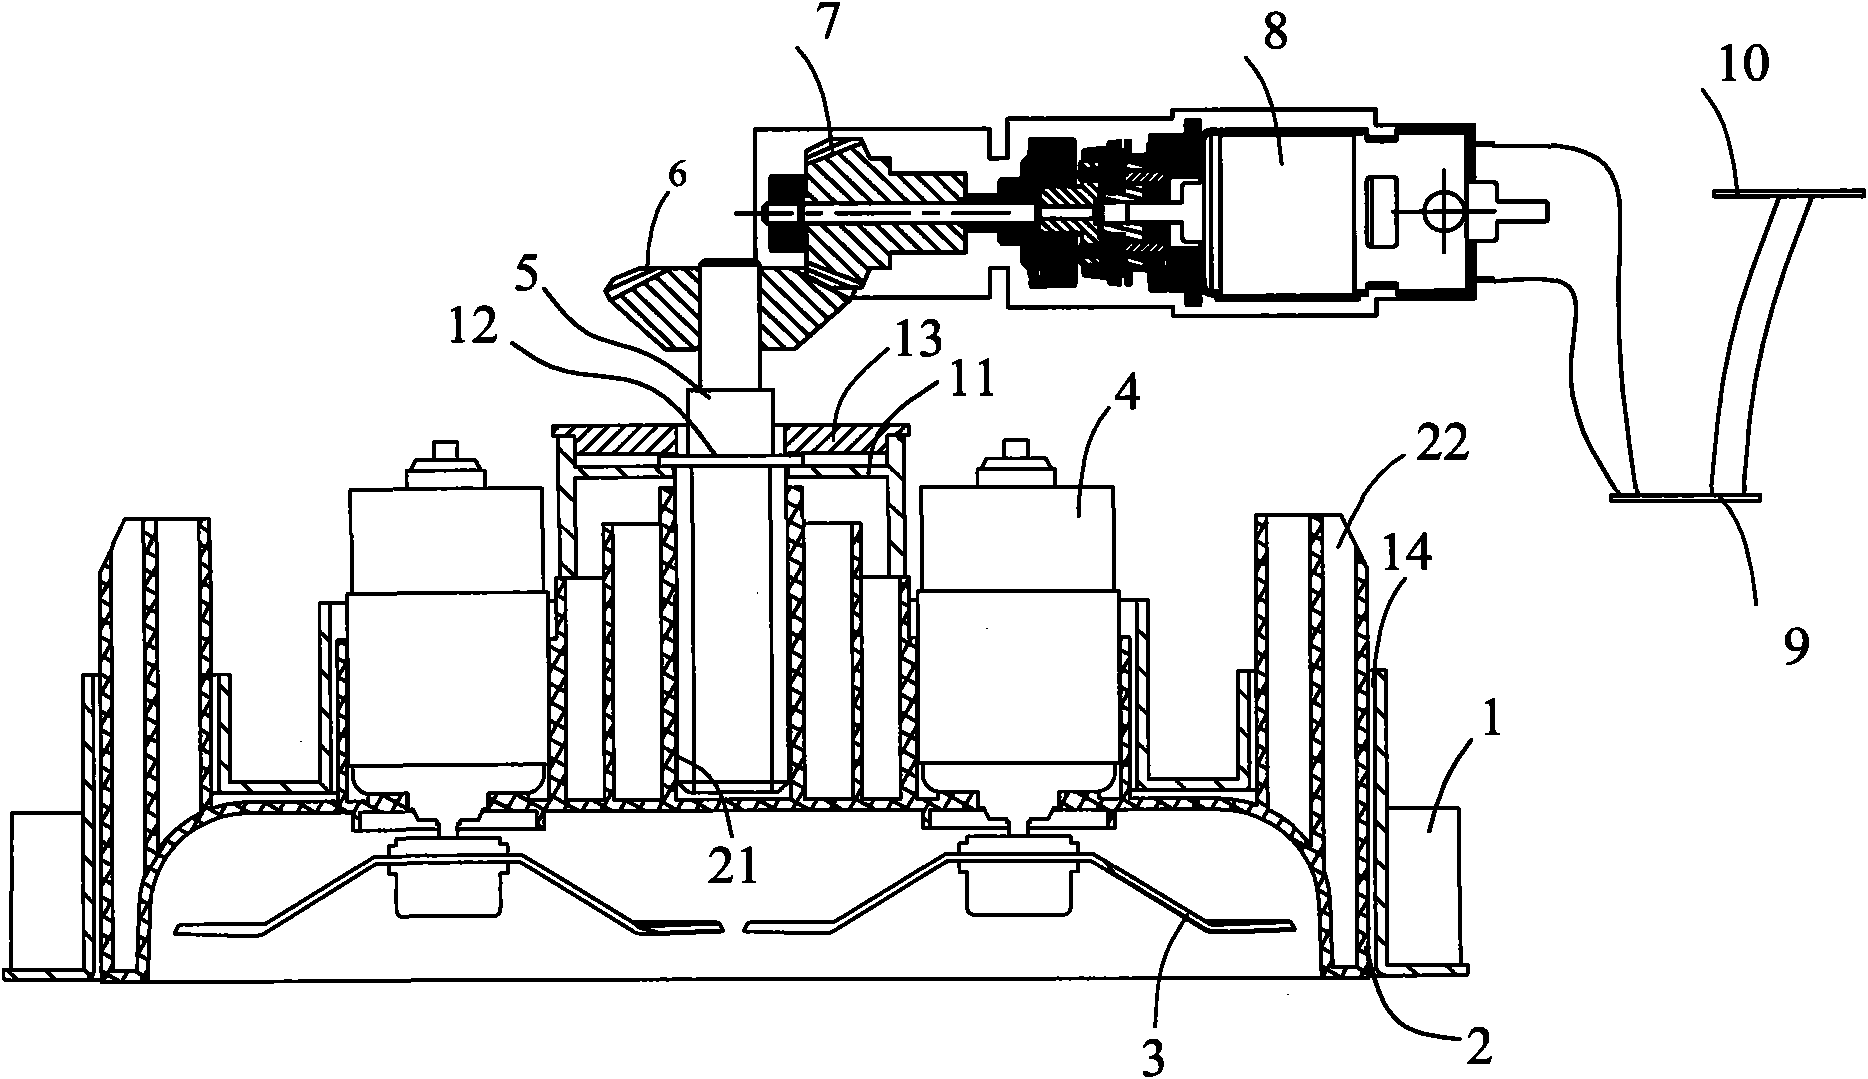 Structure for automatically regulating mowing height of intelligent mower